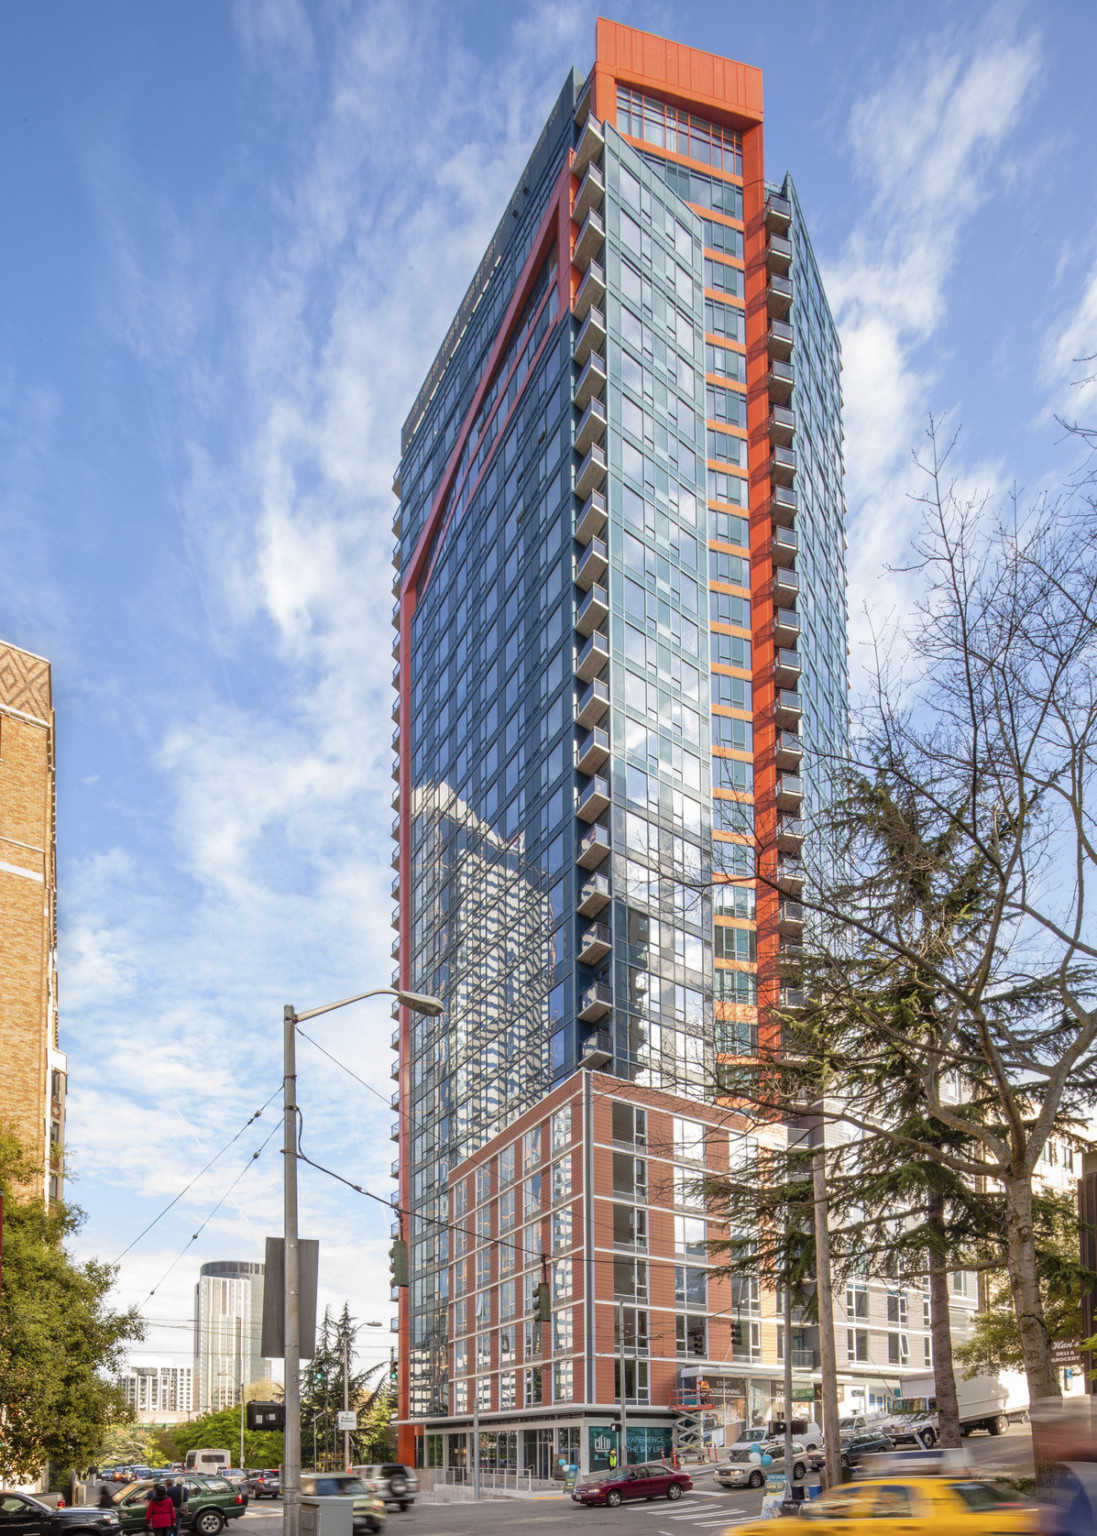 Corner view of a 32 story glass building with brick base. Middle glass wall angles inwards to recessed orange facade